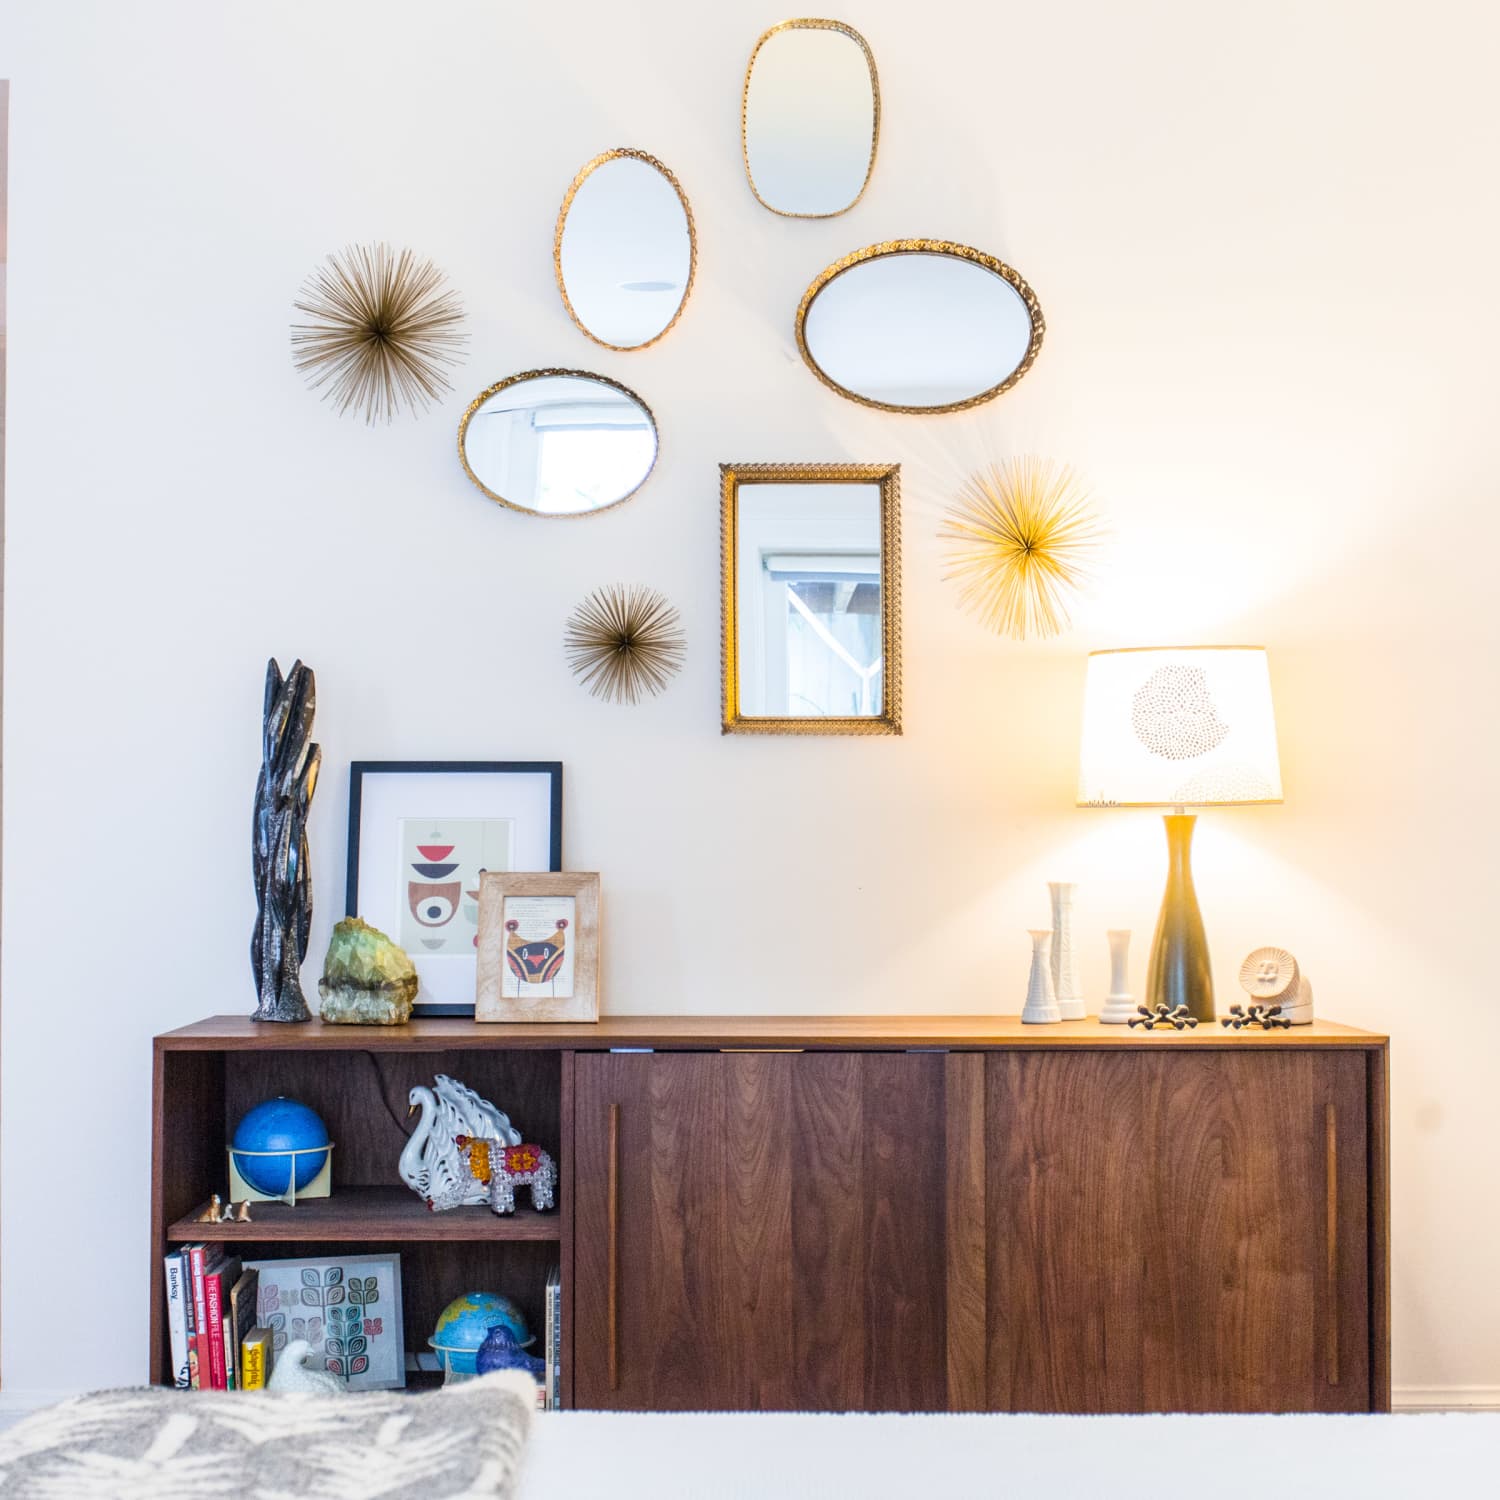 West Elm Wall Art Sale - Home Deals July 2019 | Apartment Therapy